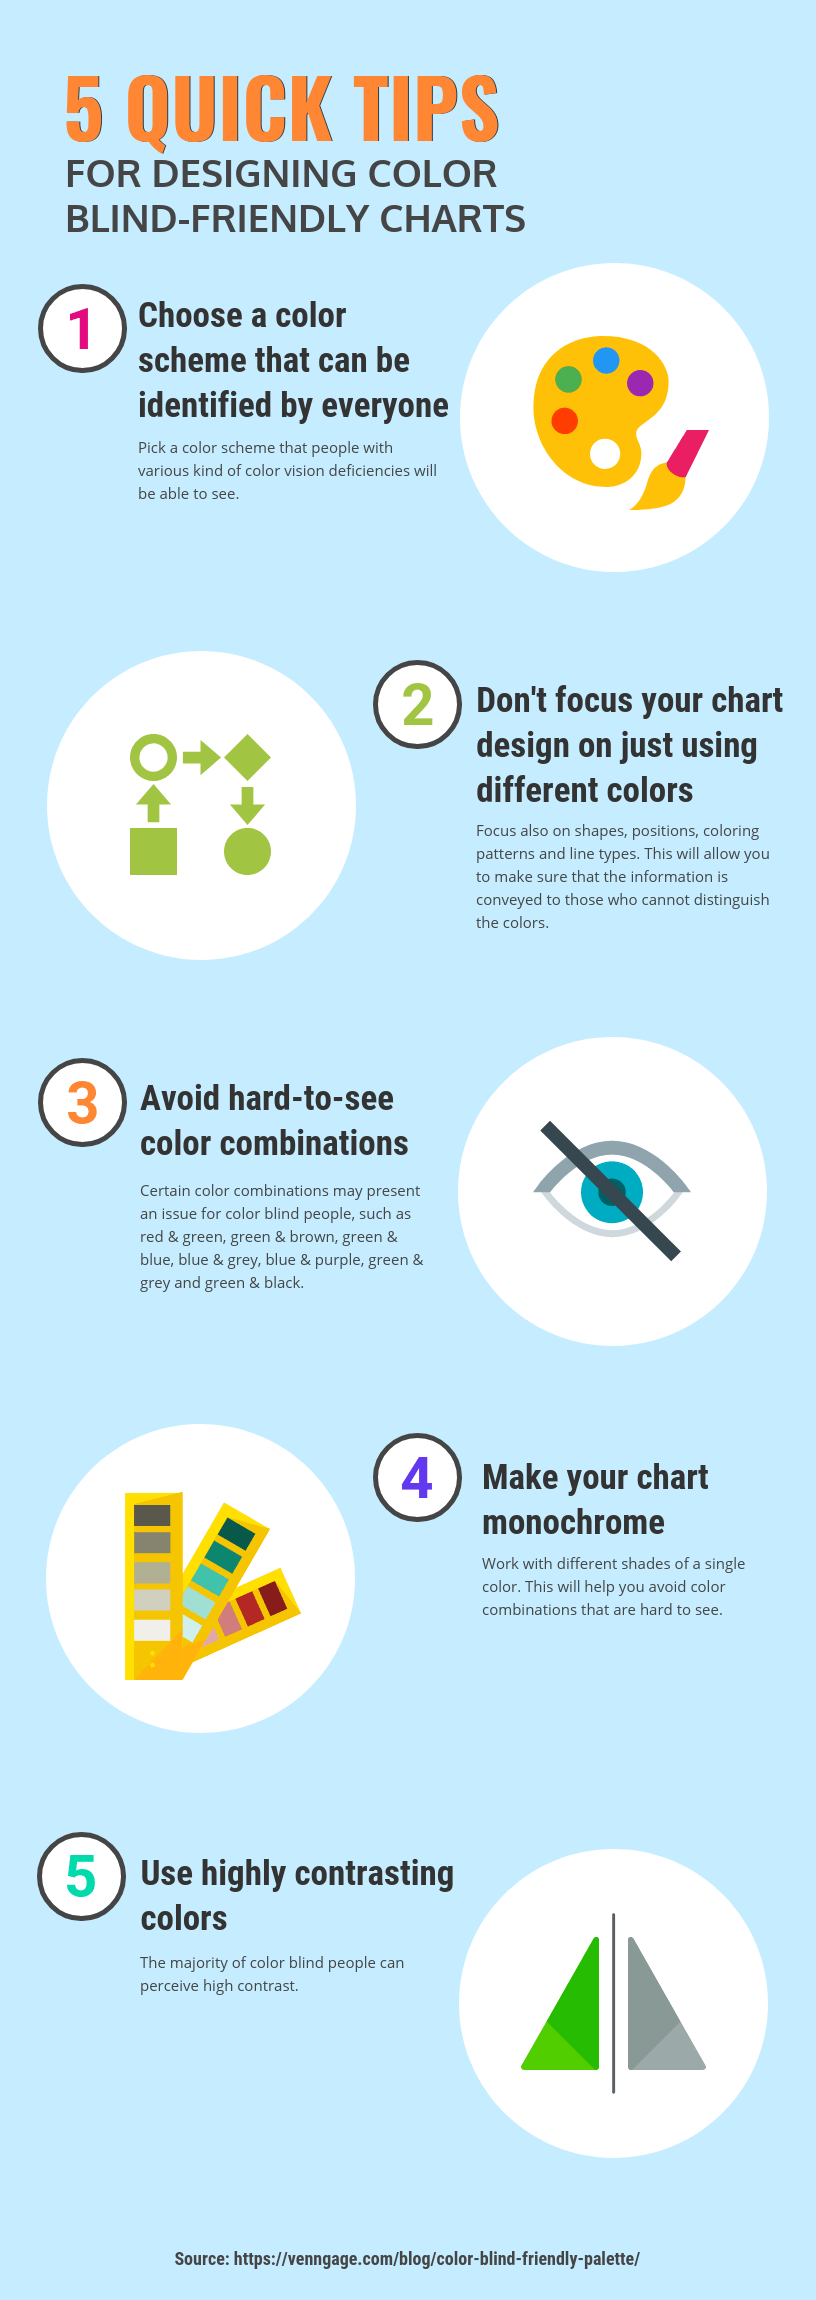 Blue Green and Black Logo - How to Optimize Charts For Color Blind Readers Using Color Blind ...